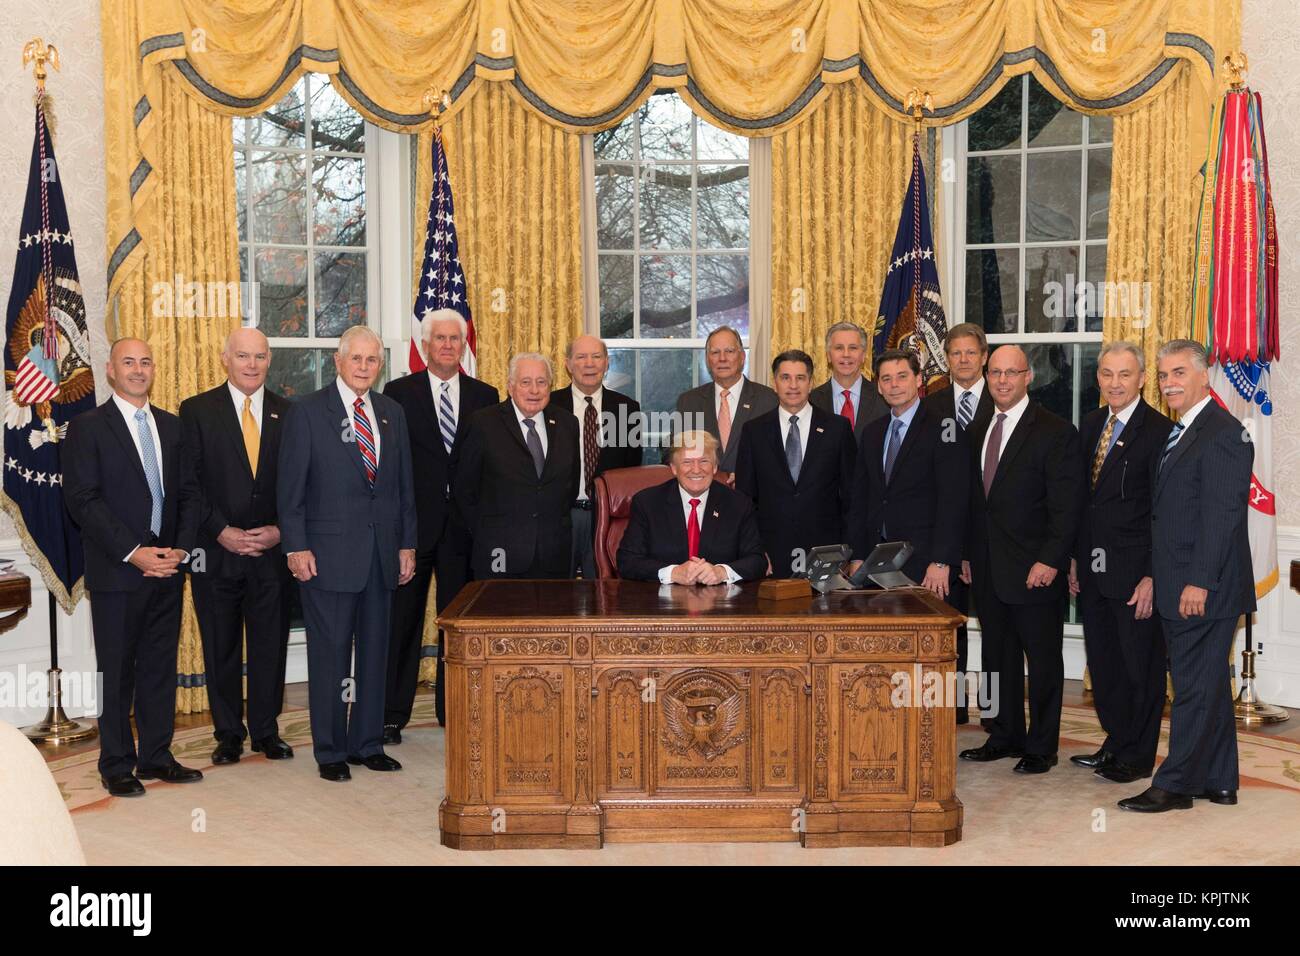 U.S. President Donald Trump poses with the former leaders of the U.S. Secret Service Presidential Protective Division in the Oval Office of the White House December 14, 2017 in Washington, DC. Stock Photo